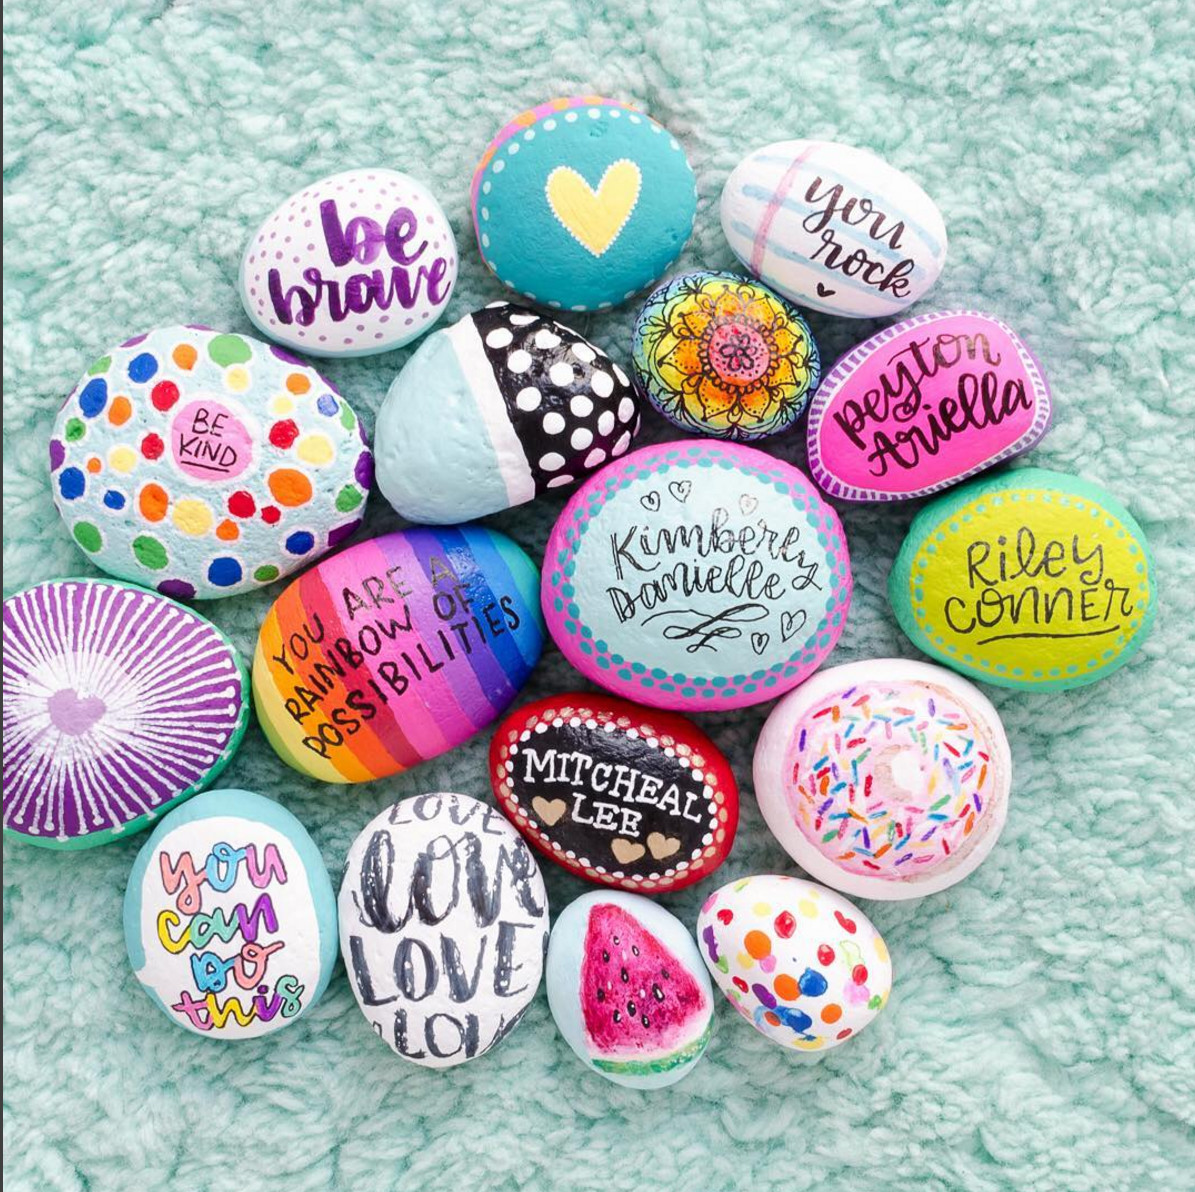 Kindness Rocks Quotes
 10 INSPIRING PAINTED ROCKS FOR SPREADING KINDNESS